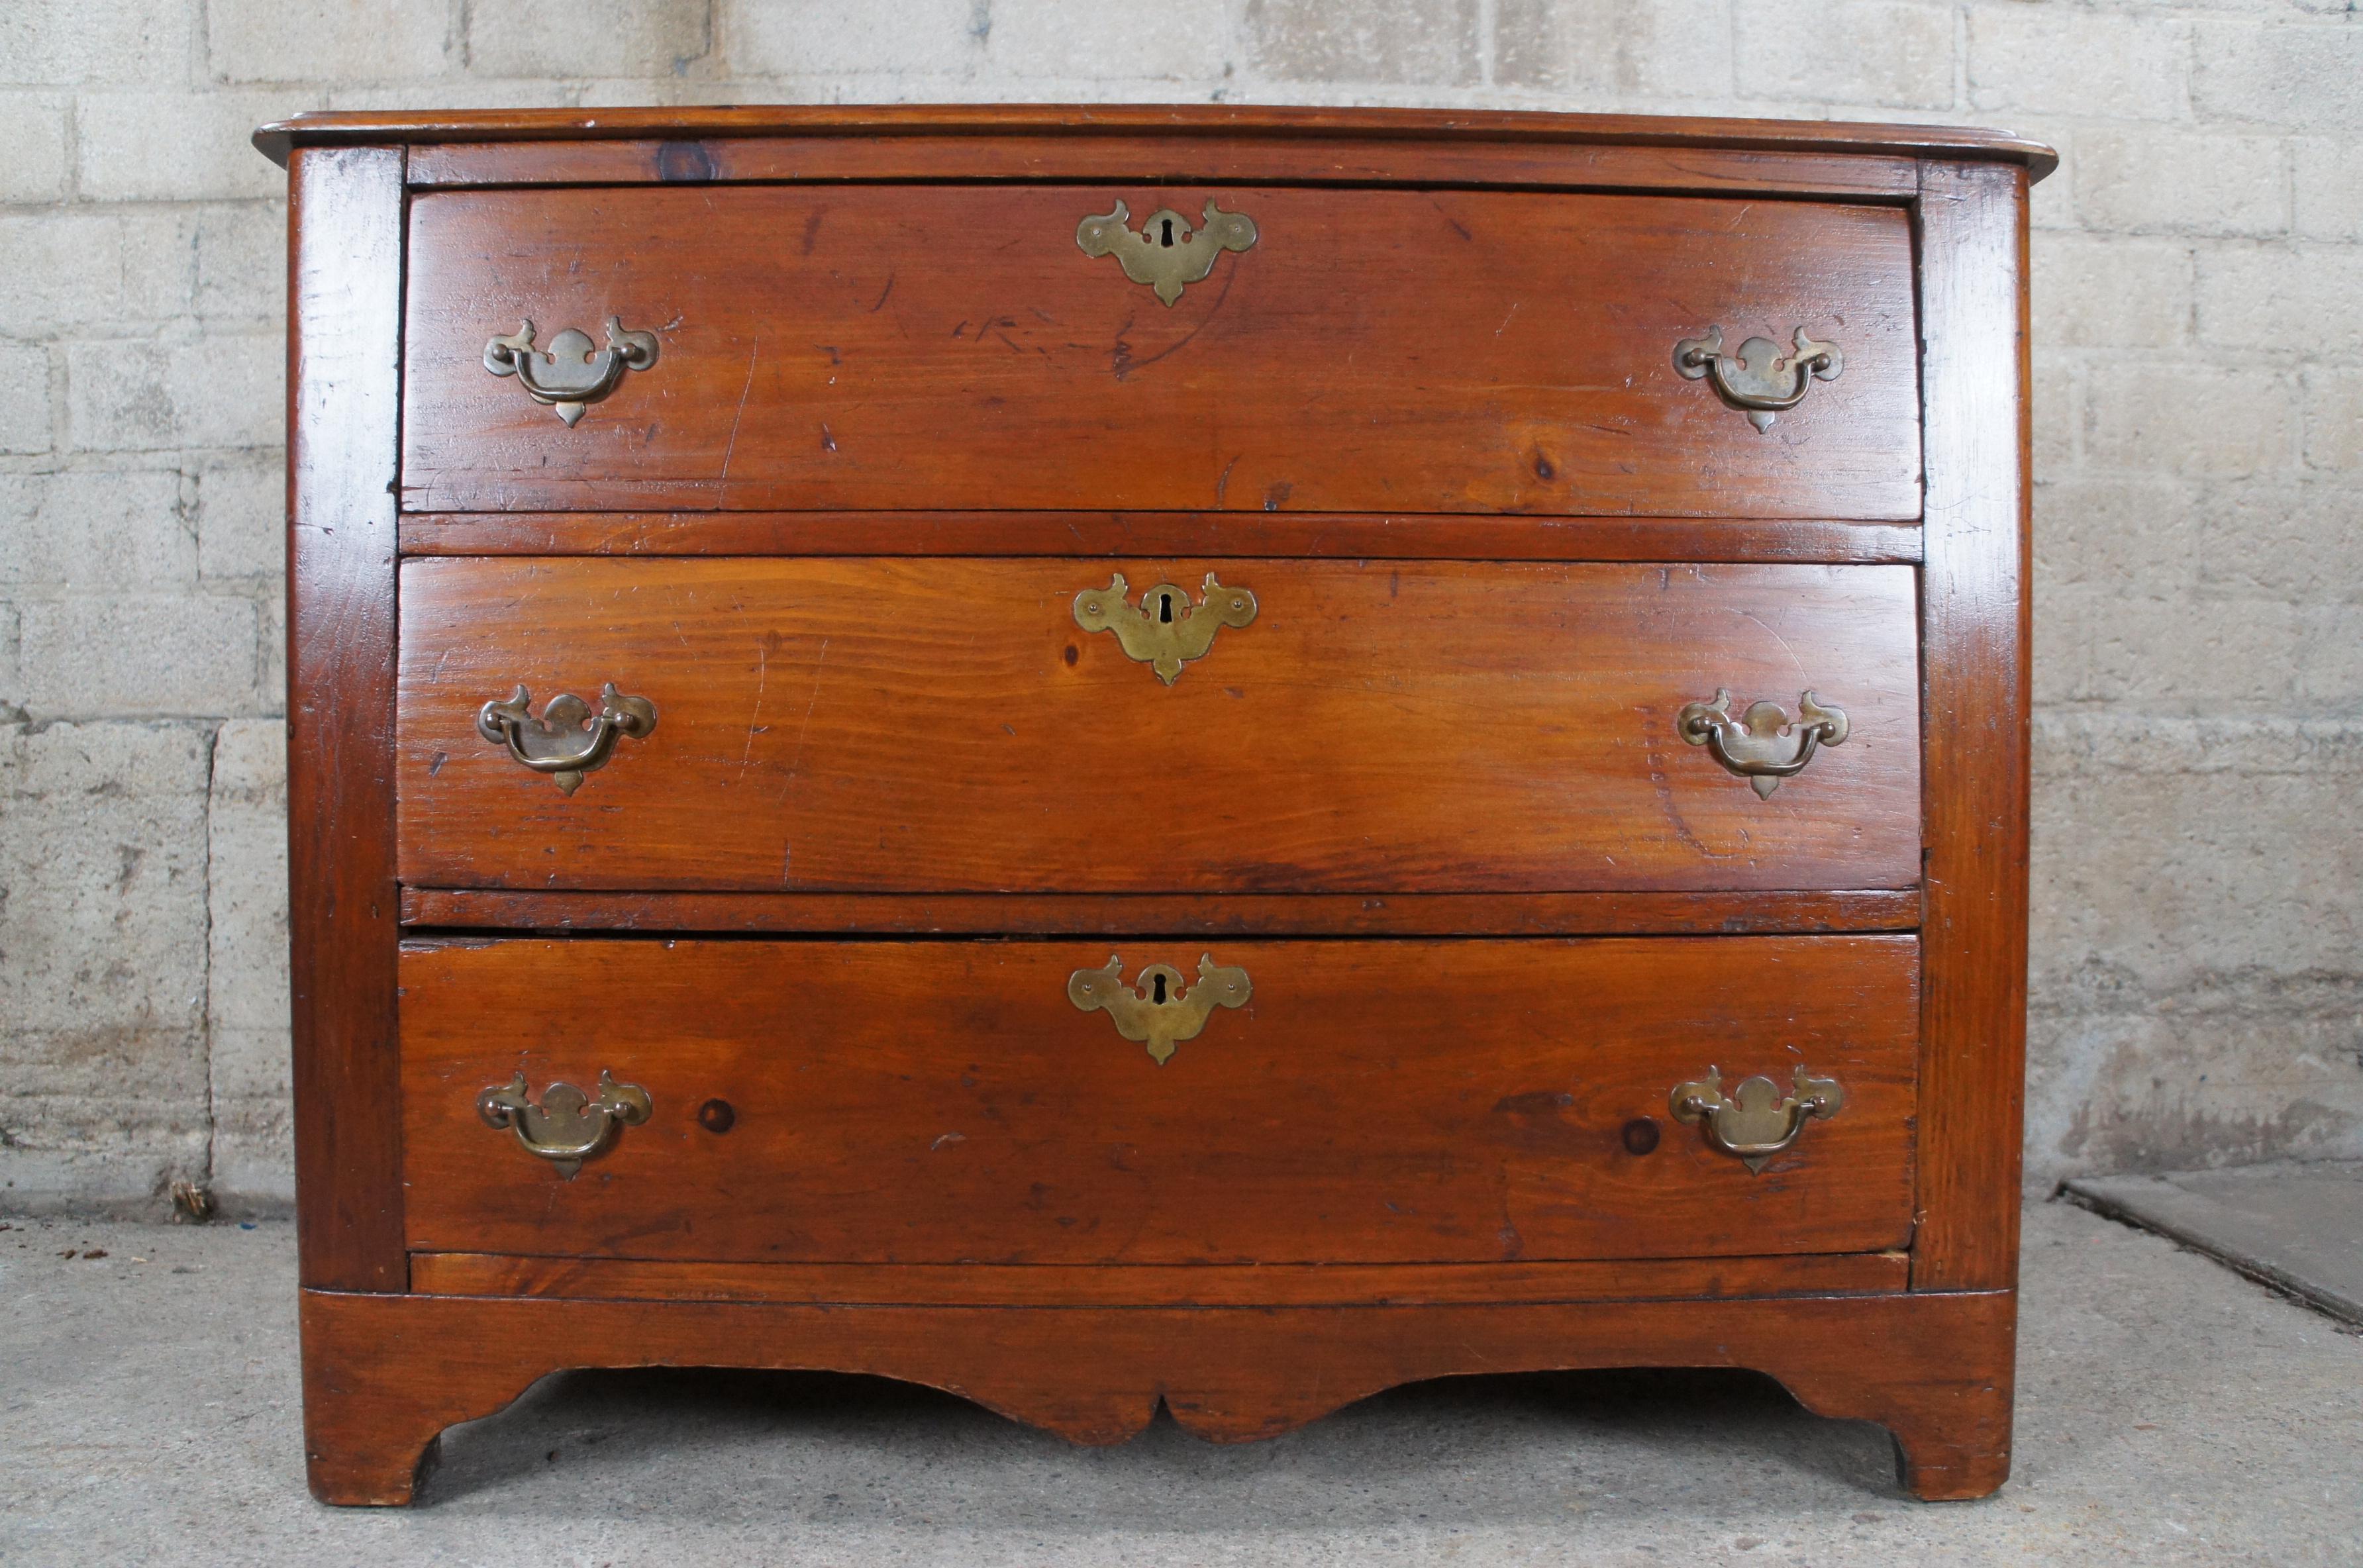 Antique Early American Colonial Pine Lowboy Chest of Drawers Dresser Console 2